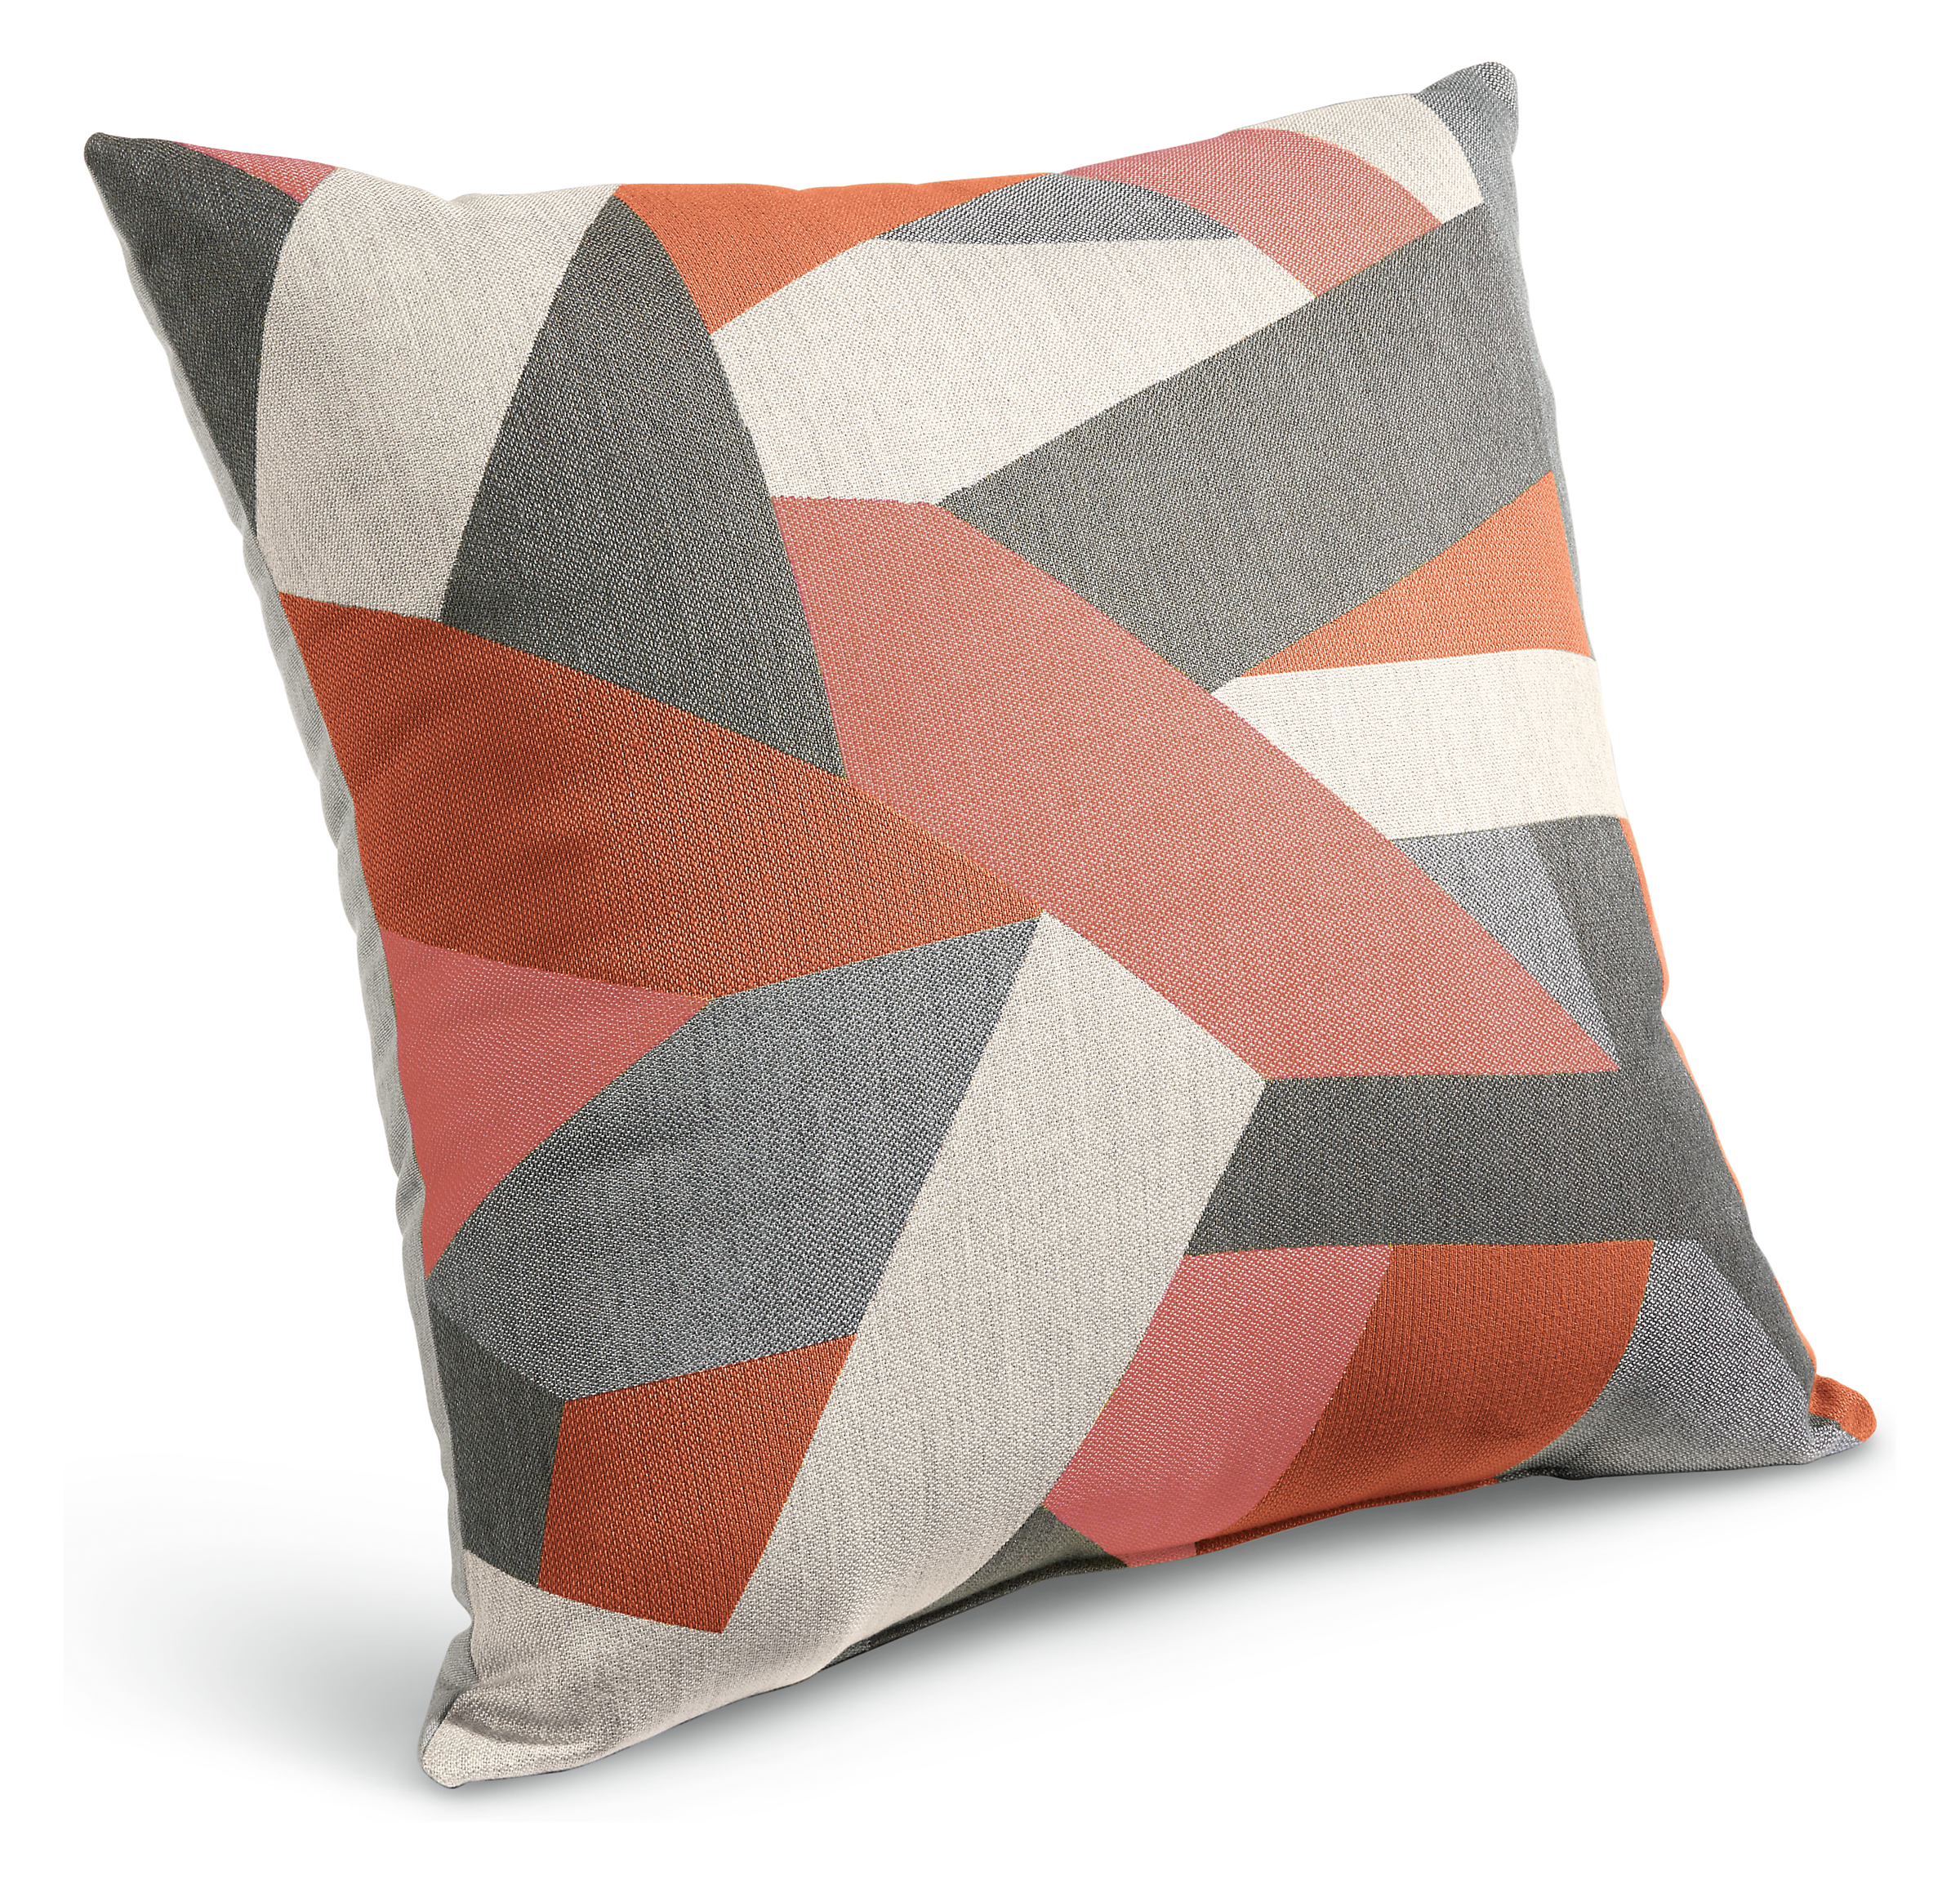 Refract 24w 24h Outdoor Pillow in Wye Orange/Cement